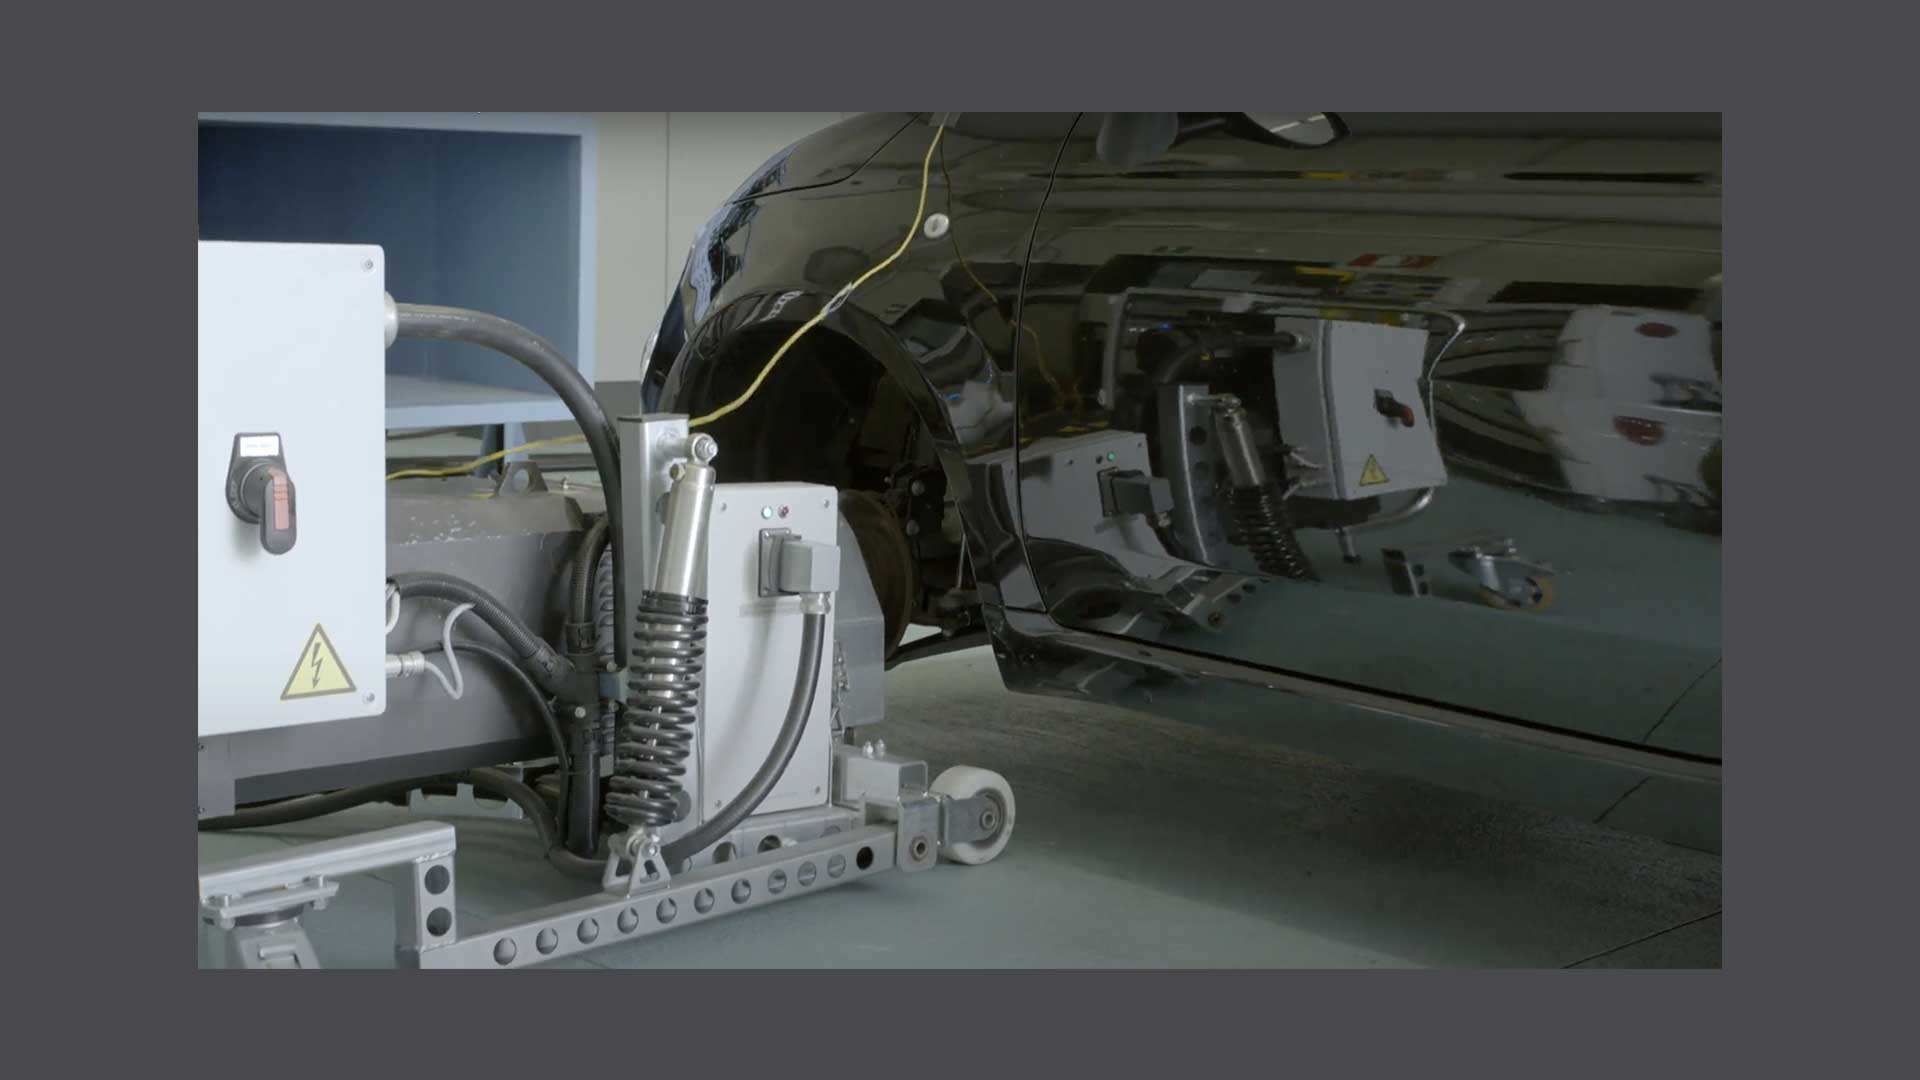 Photos of tools for testing an automobile